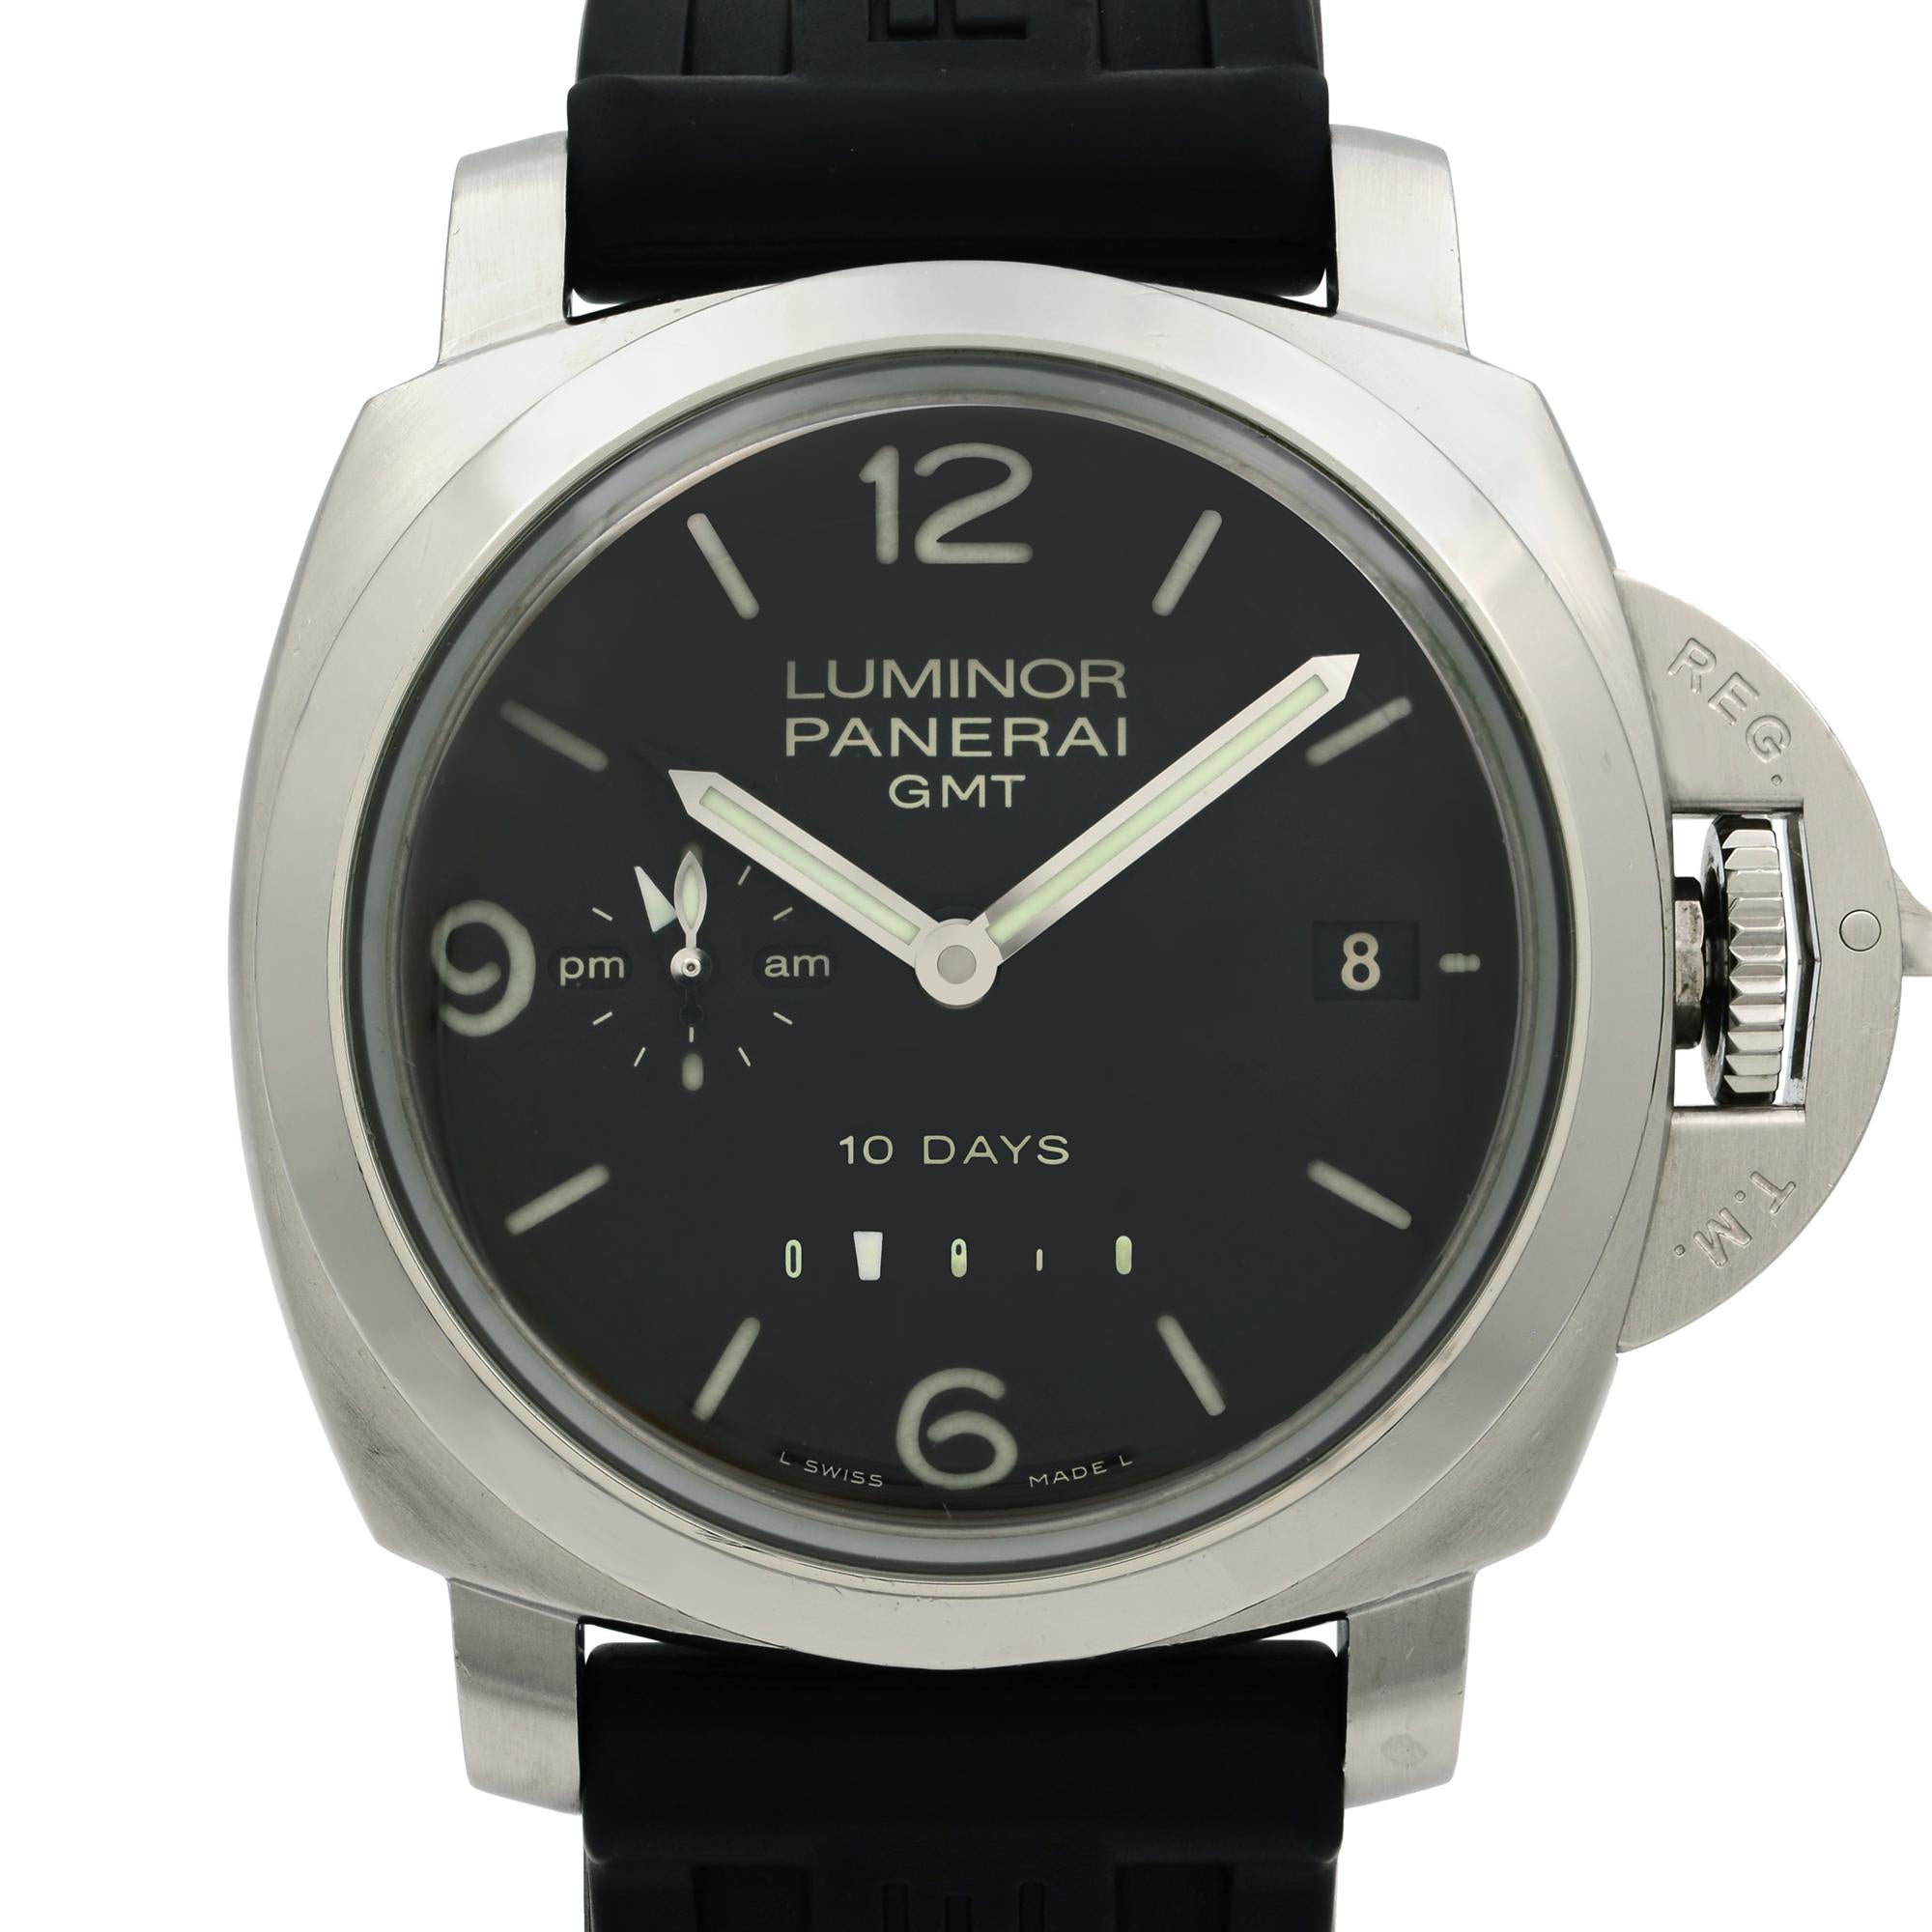 Pre-Owned Panerai Luminor GMT 10 Days In Excellent Condition. Original Box and Papers are not included comes with a Chronostore presentation box and authenticity card. Covered by a one-year Chronostore warranty.
Details:
MSRP 13400
Brand Officine